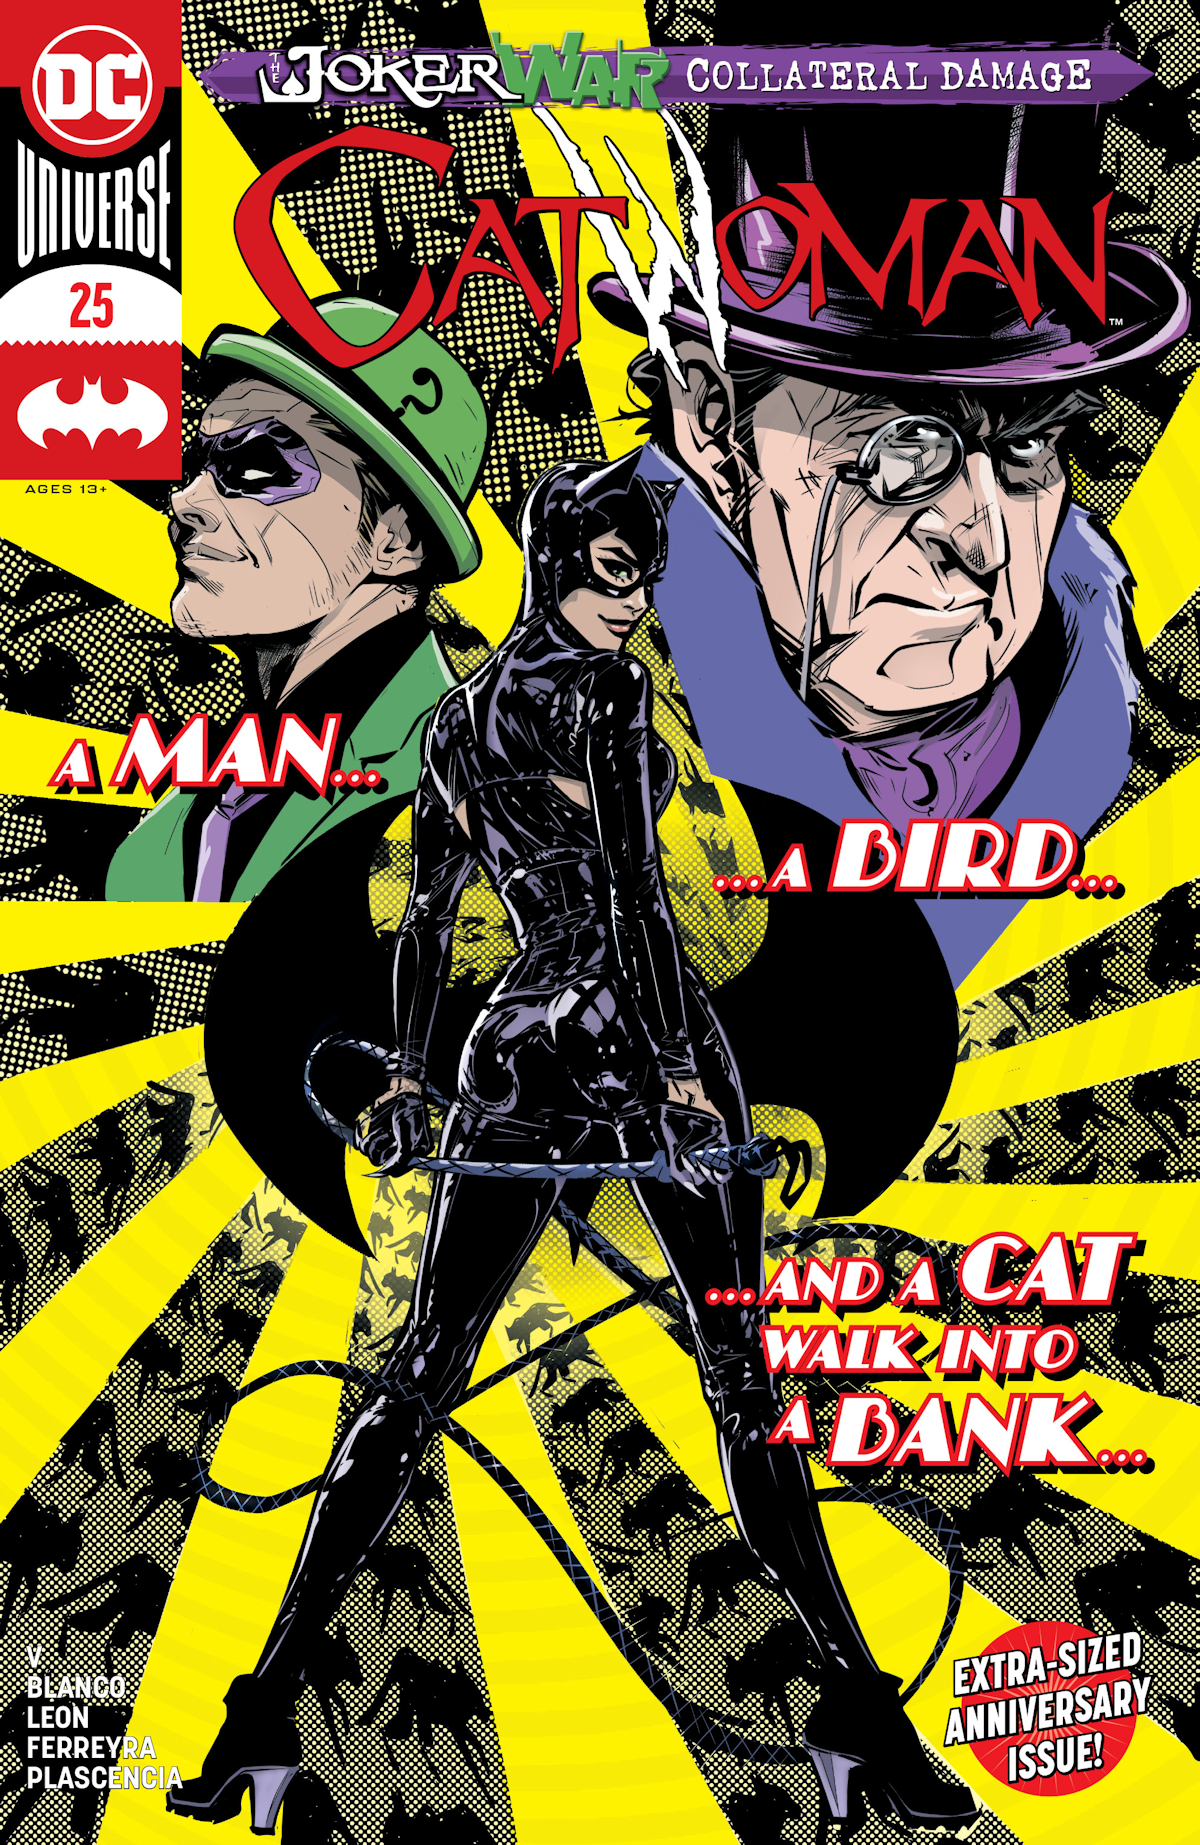 Catwoman Vol. 5 25 (Cover A)